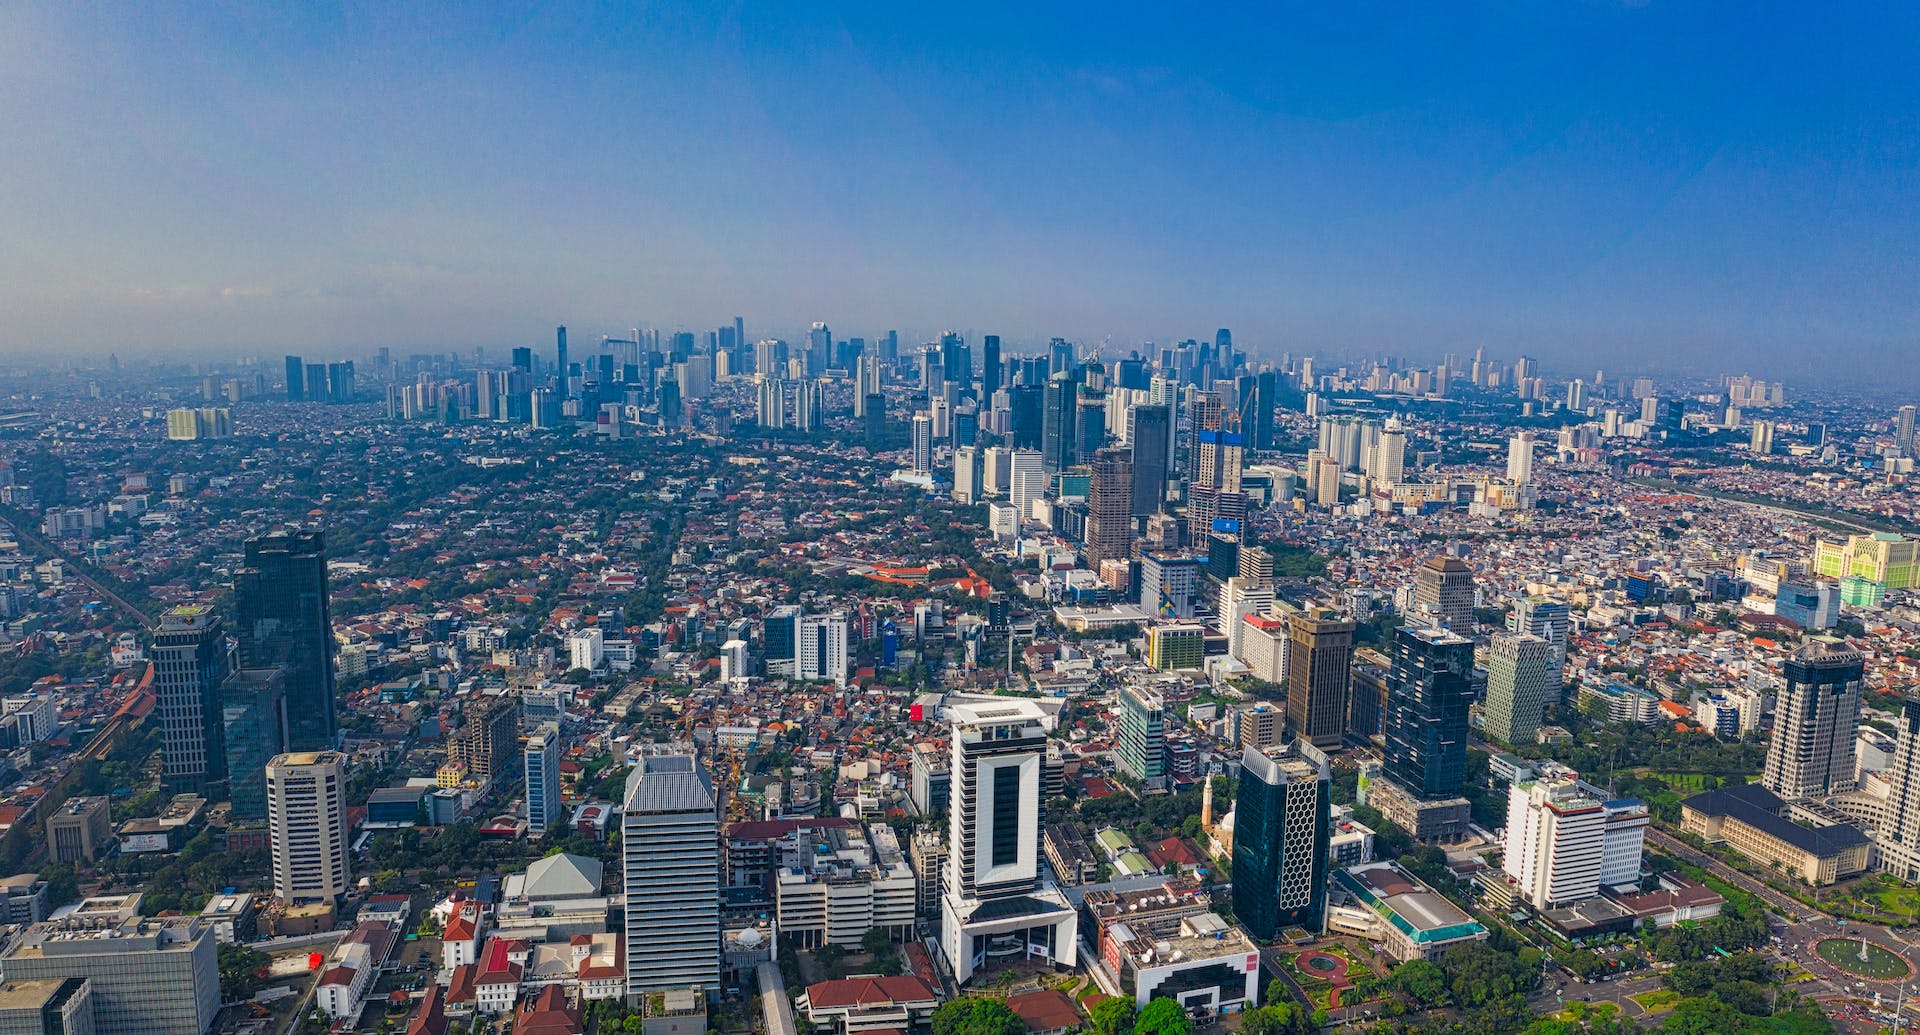 Indonesia looks to the future with digital health reforms